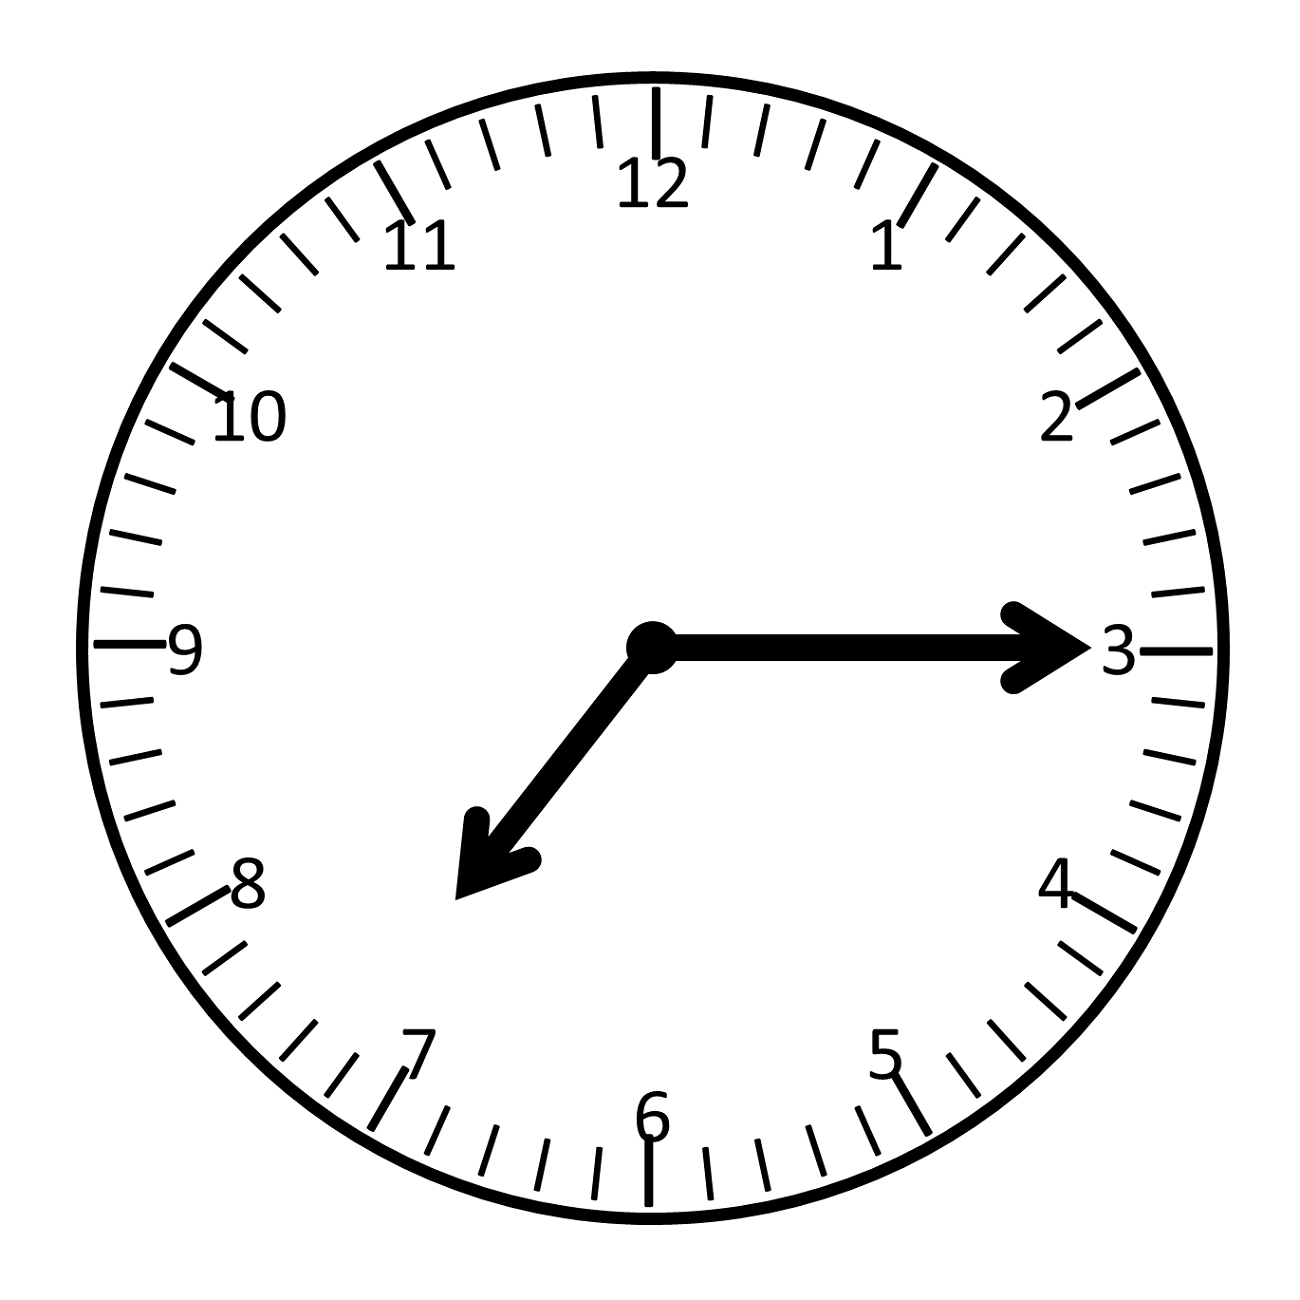 clock face template for kids